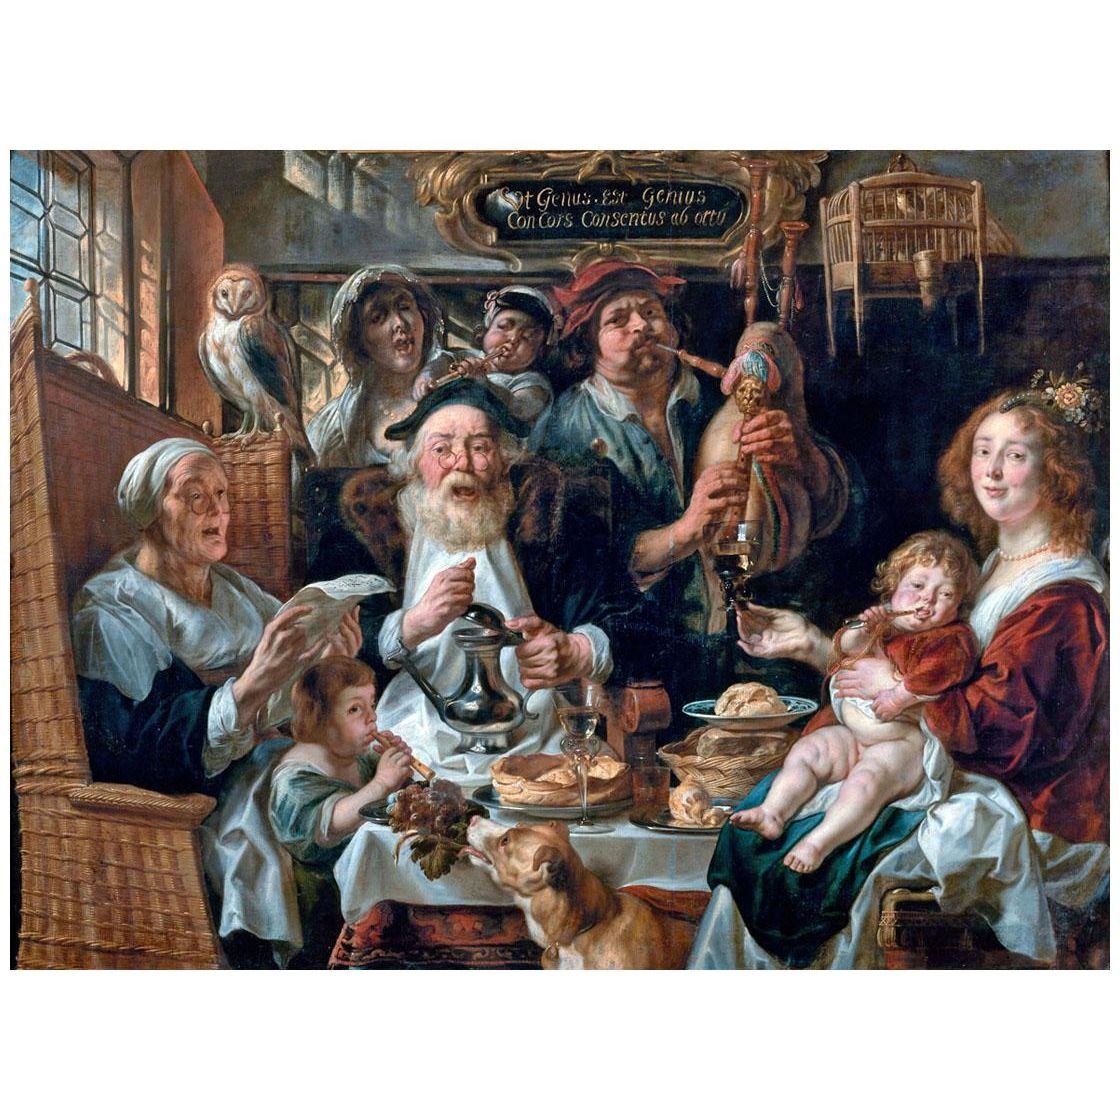 Jacob Jordaens. As the Old Sing, So the Young Pipe. 1638. Musee des Beaux Arts Valenciennes